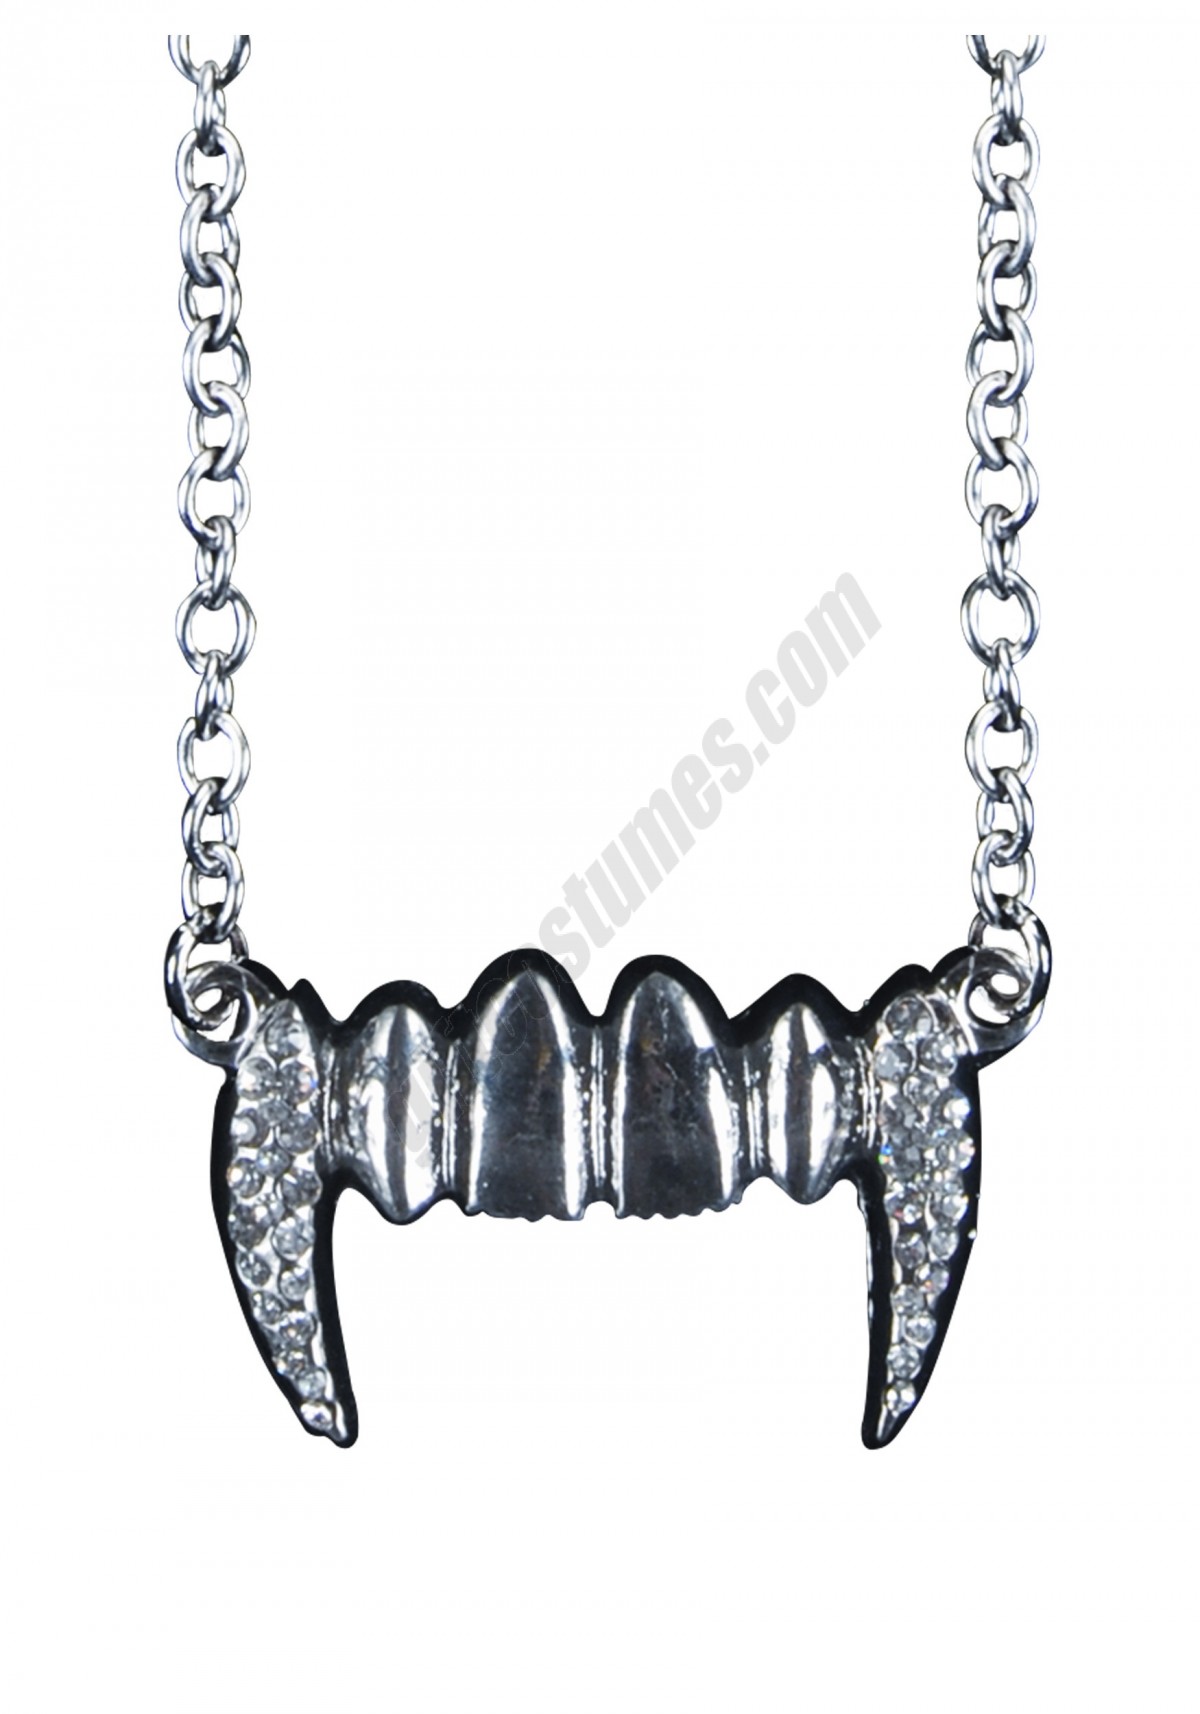 Vampire Fang Necklace Promotions - -0